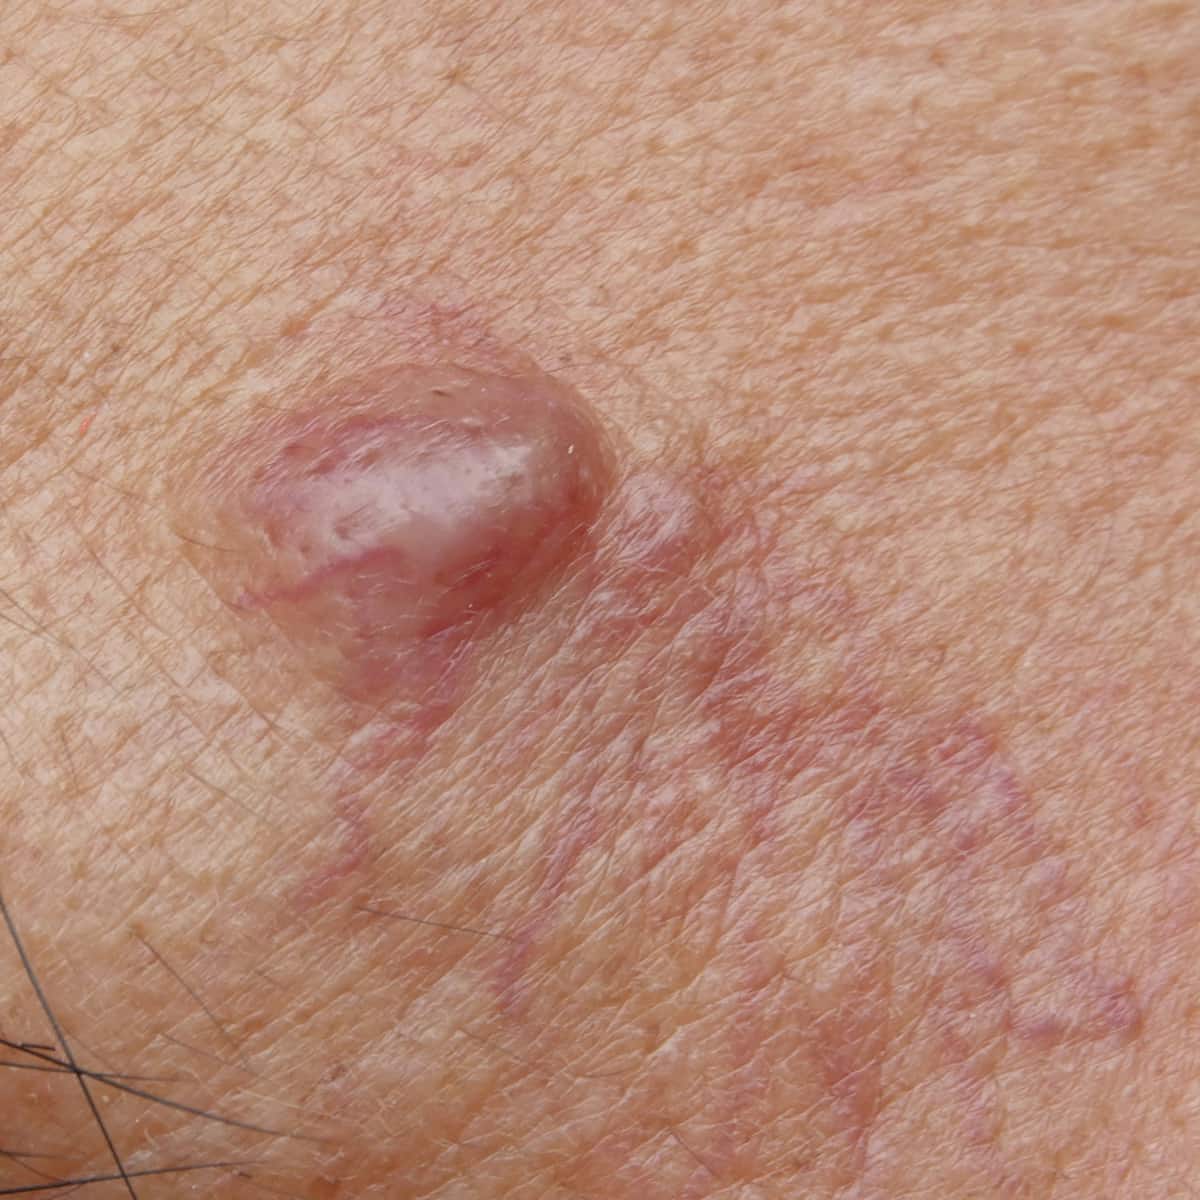 cyst-removal-st-louis